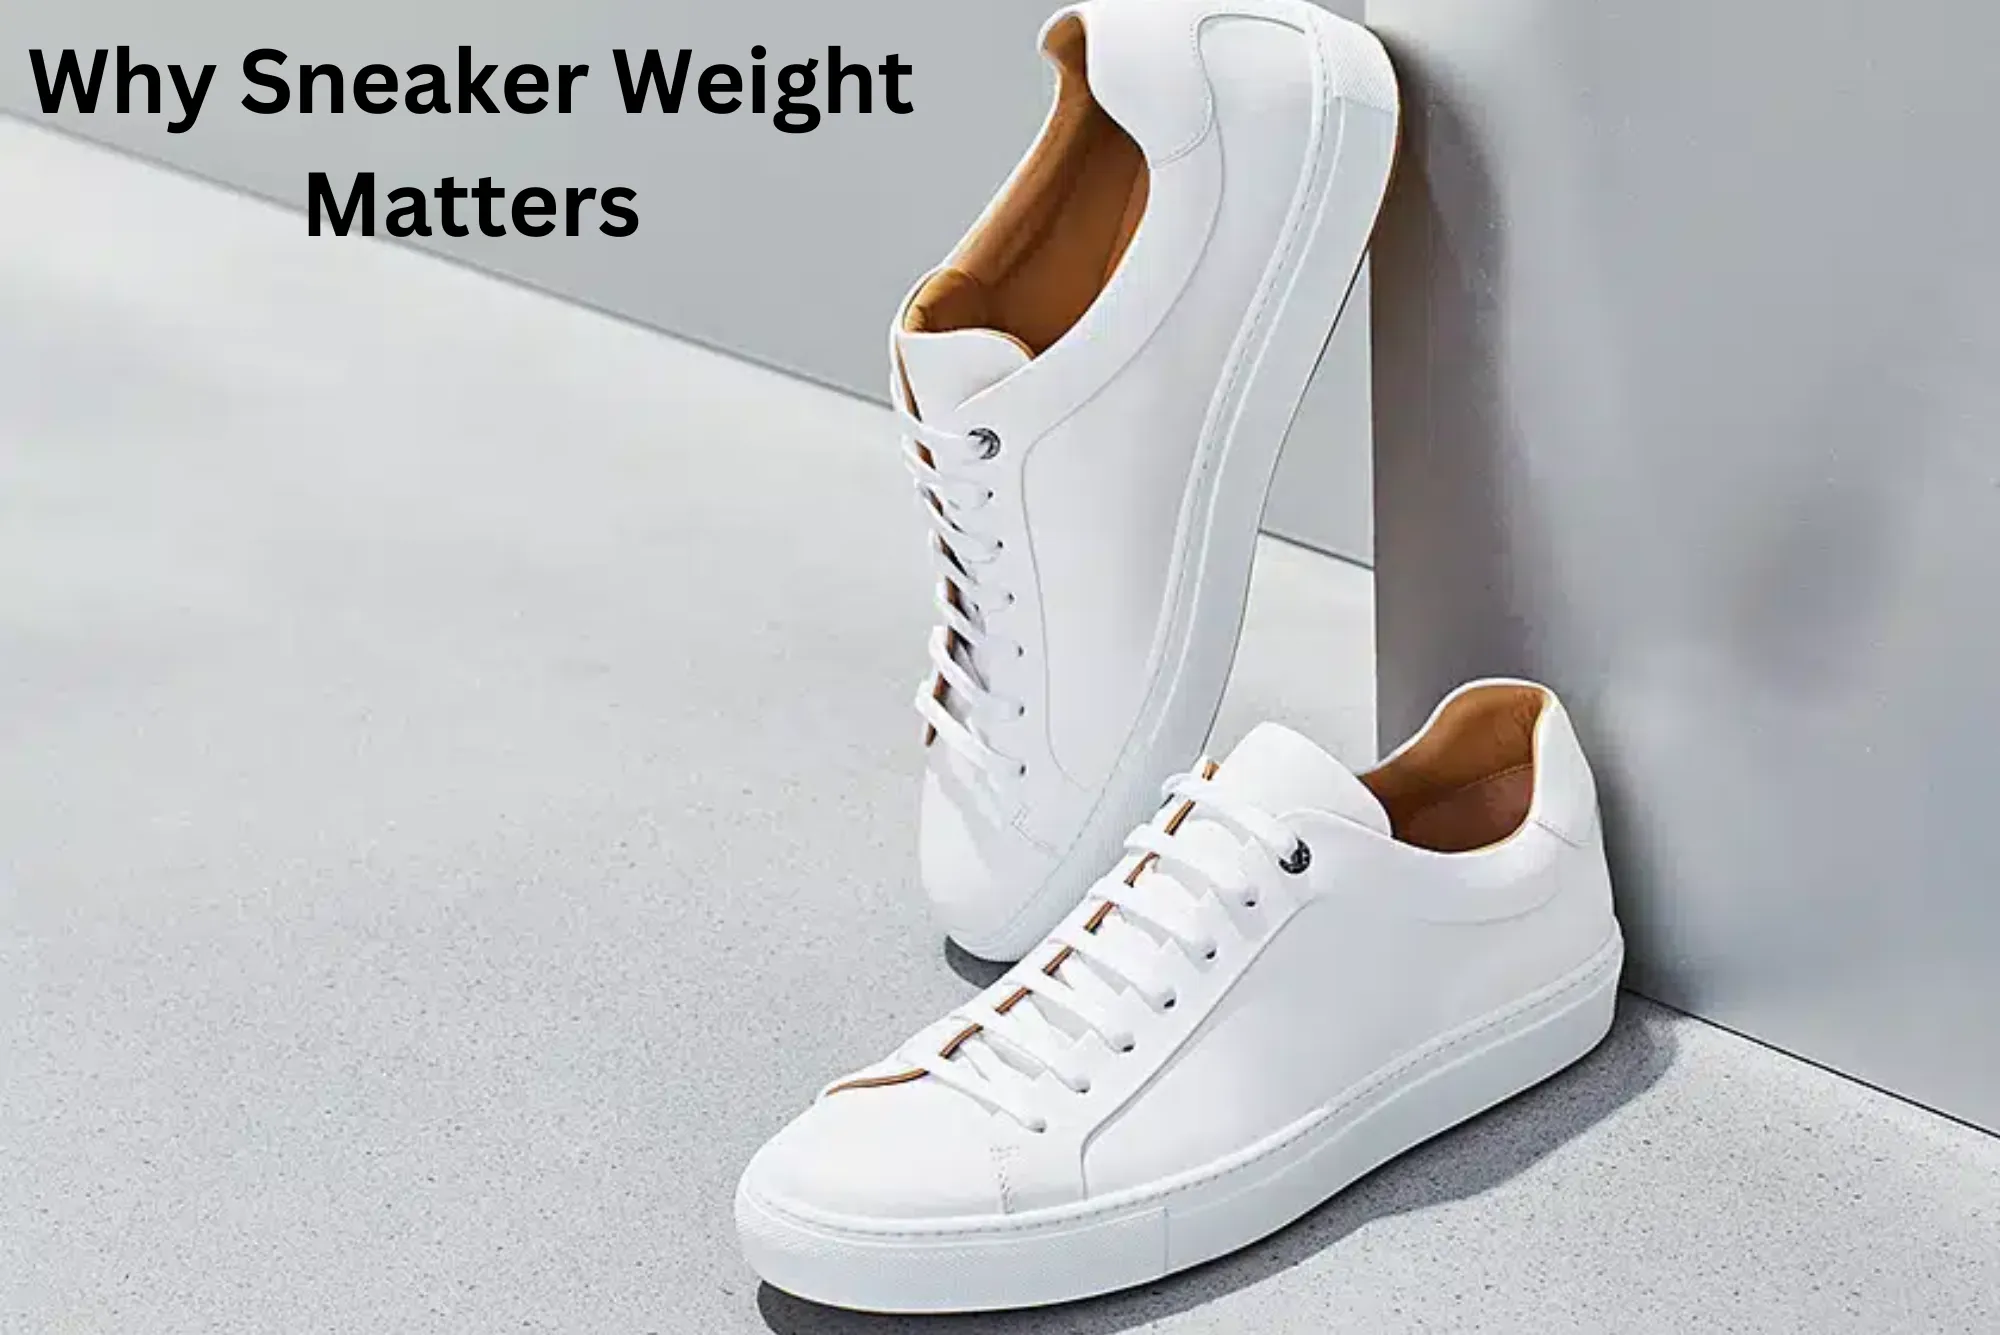 Why Sneaker Weight Matters